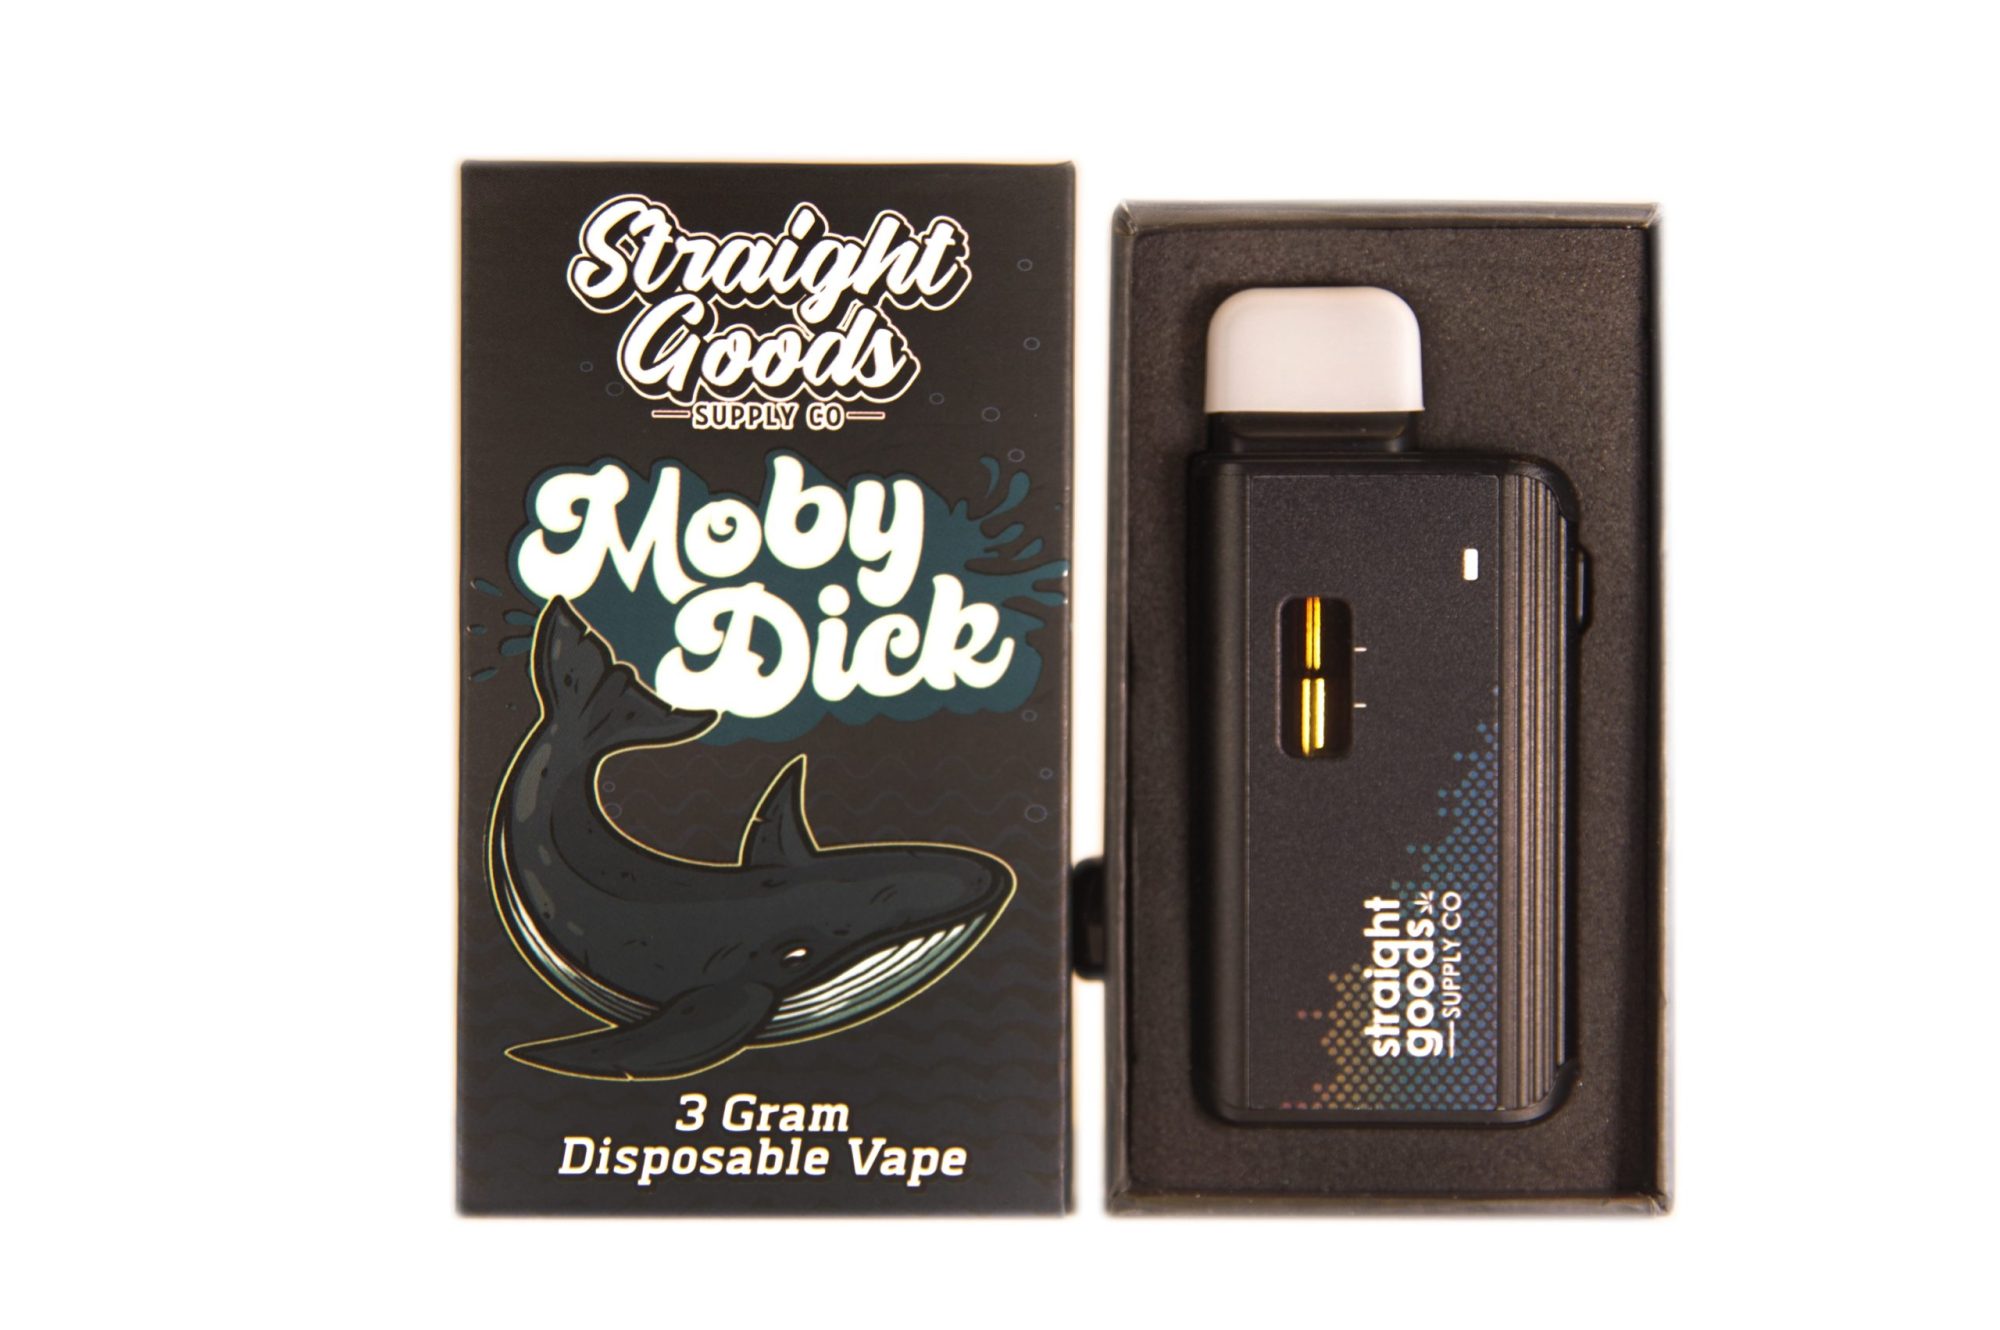 Buy Straight Goods - Moby Dick 3G Disposable Pen at Wccannabis Online Shop